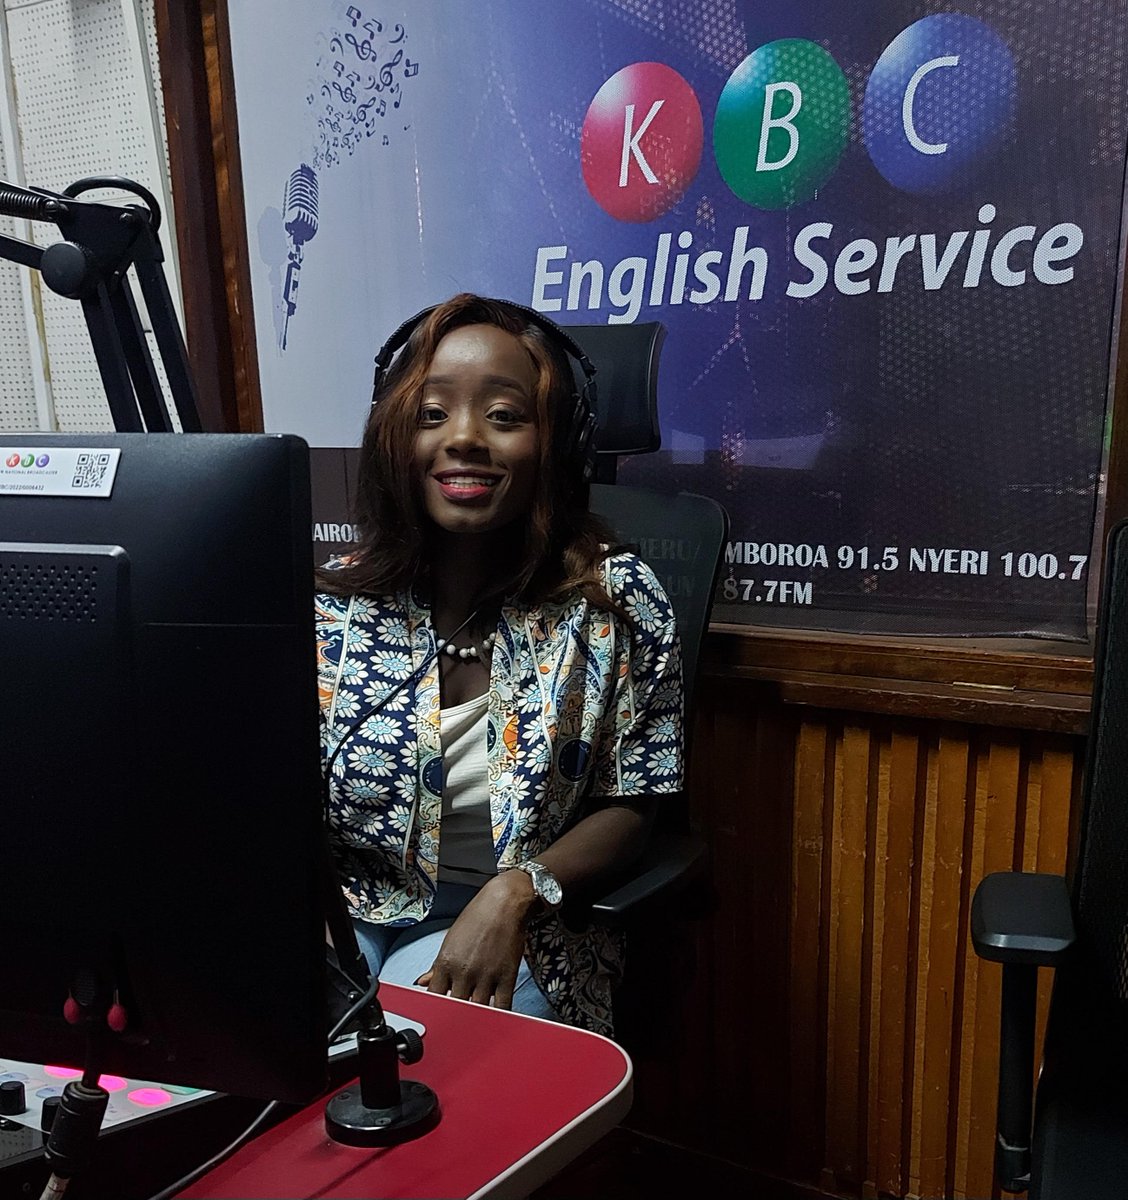 You can do anything else but don't miss🙅‍♀️ The Beat Time Show on #KBCEnglishService📻 from 4pm - 5pm with Winnie MarieJose'☺️ A miss is a diss😆 #beatimekbc #winniemariejose